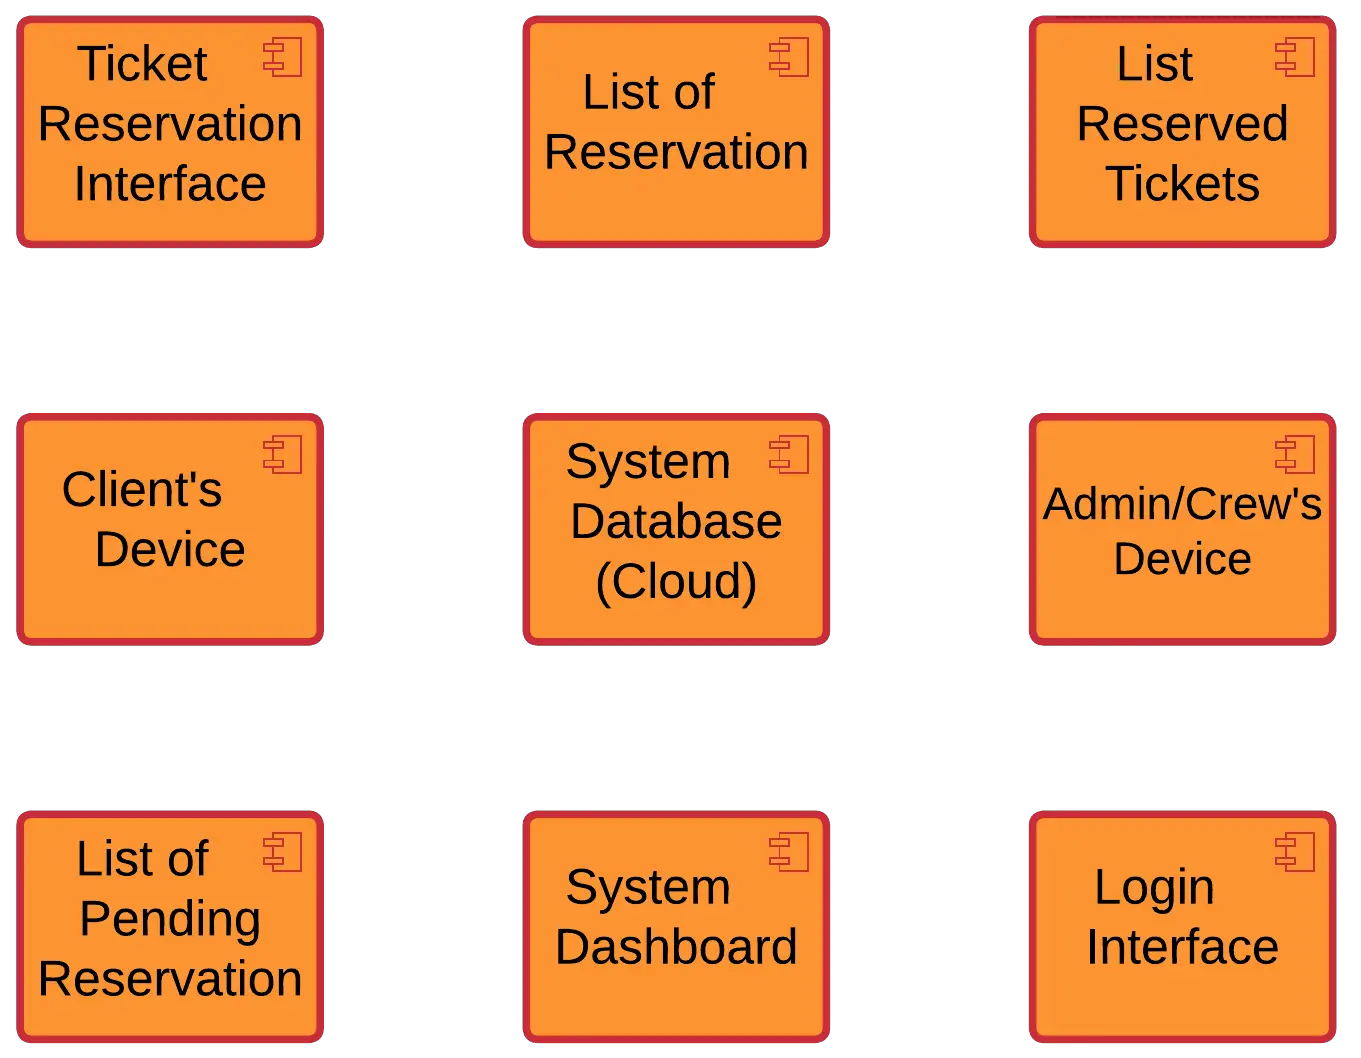 Railway Reservation System Component Diagram - Component